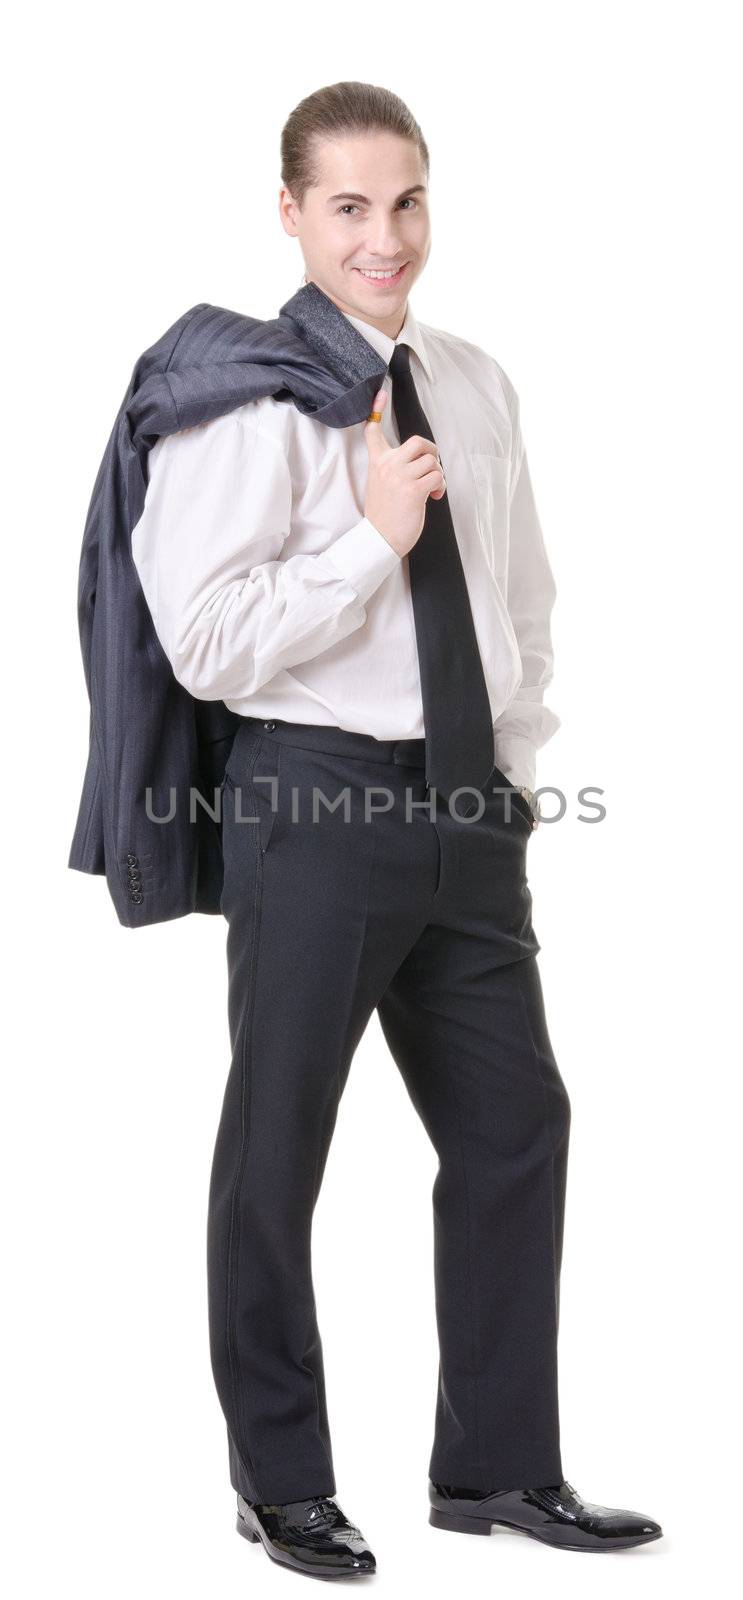 Businessman gesturing with emotions on a white background